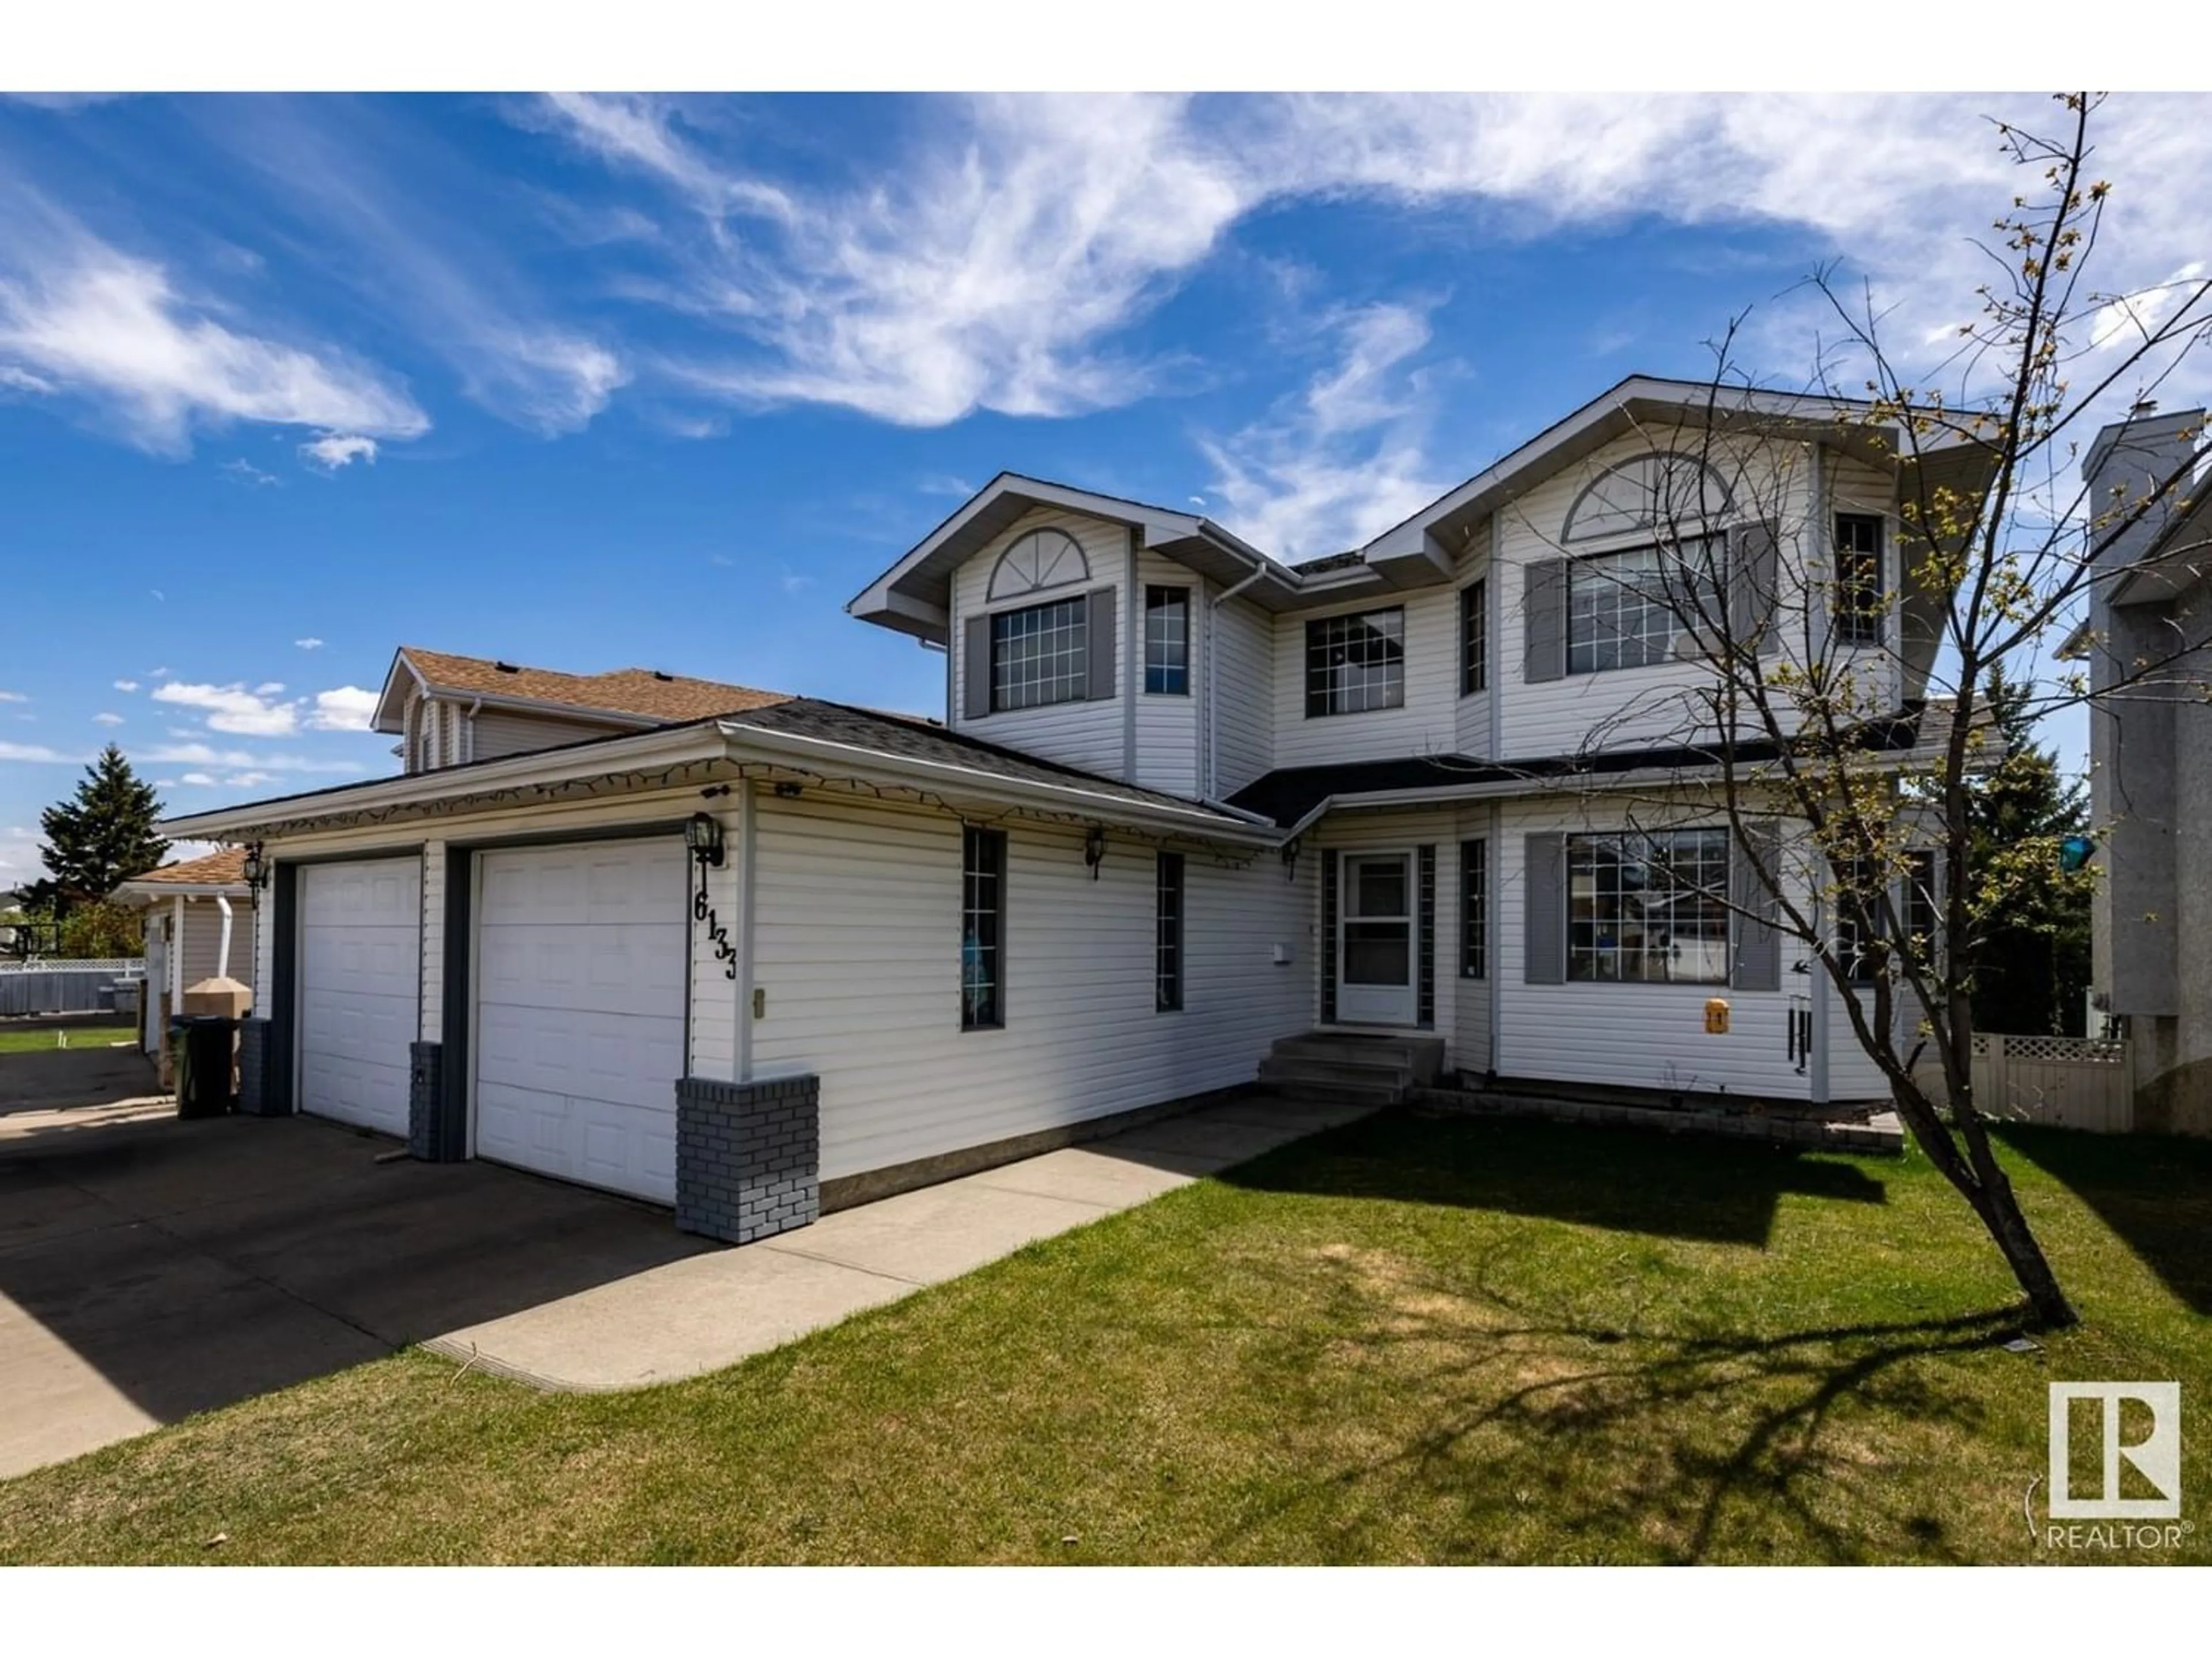 Frontside or backside of a home for 6133 157A AV NW, Edmonton Alberta T5Y2P6